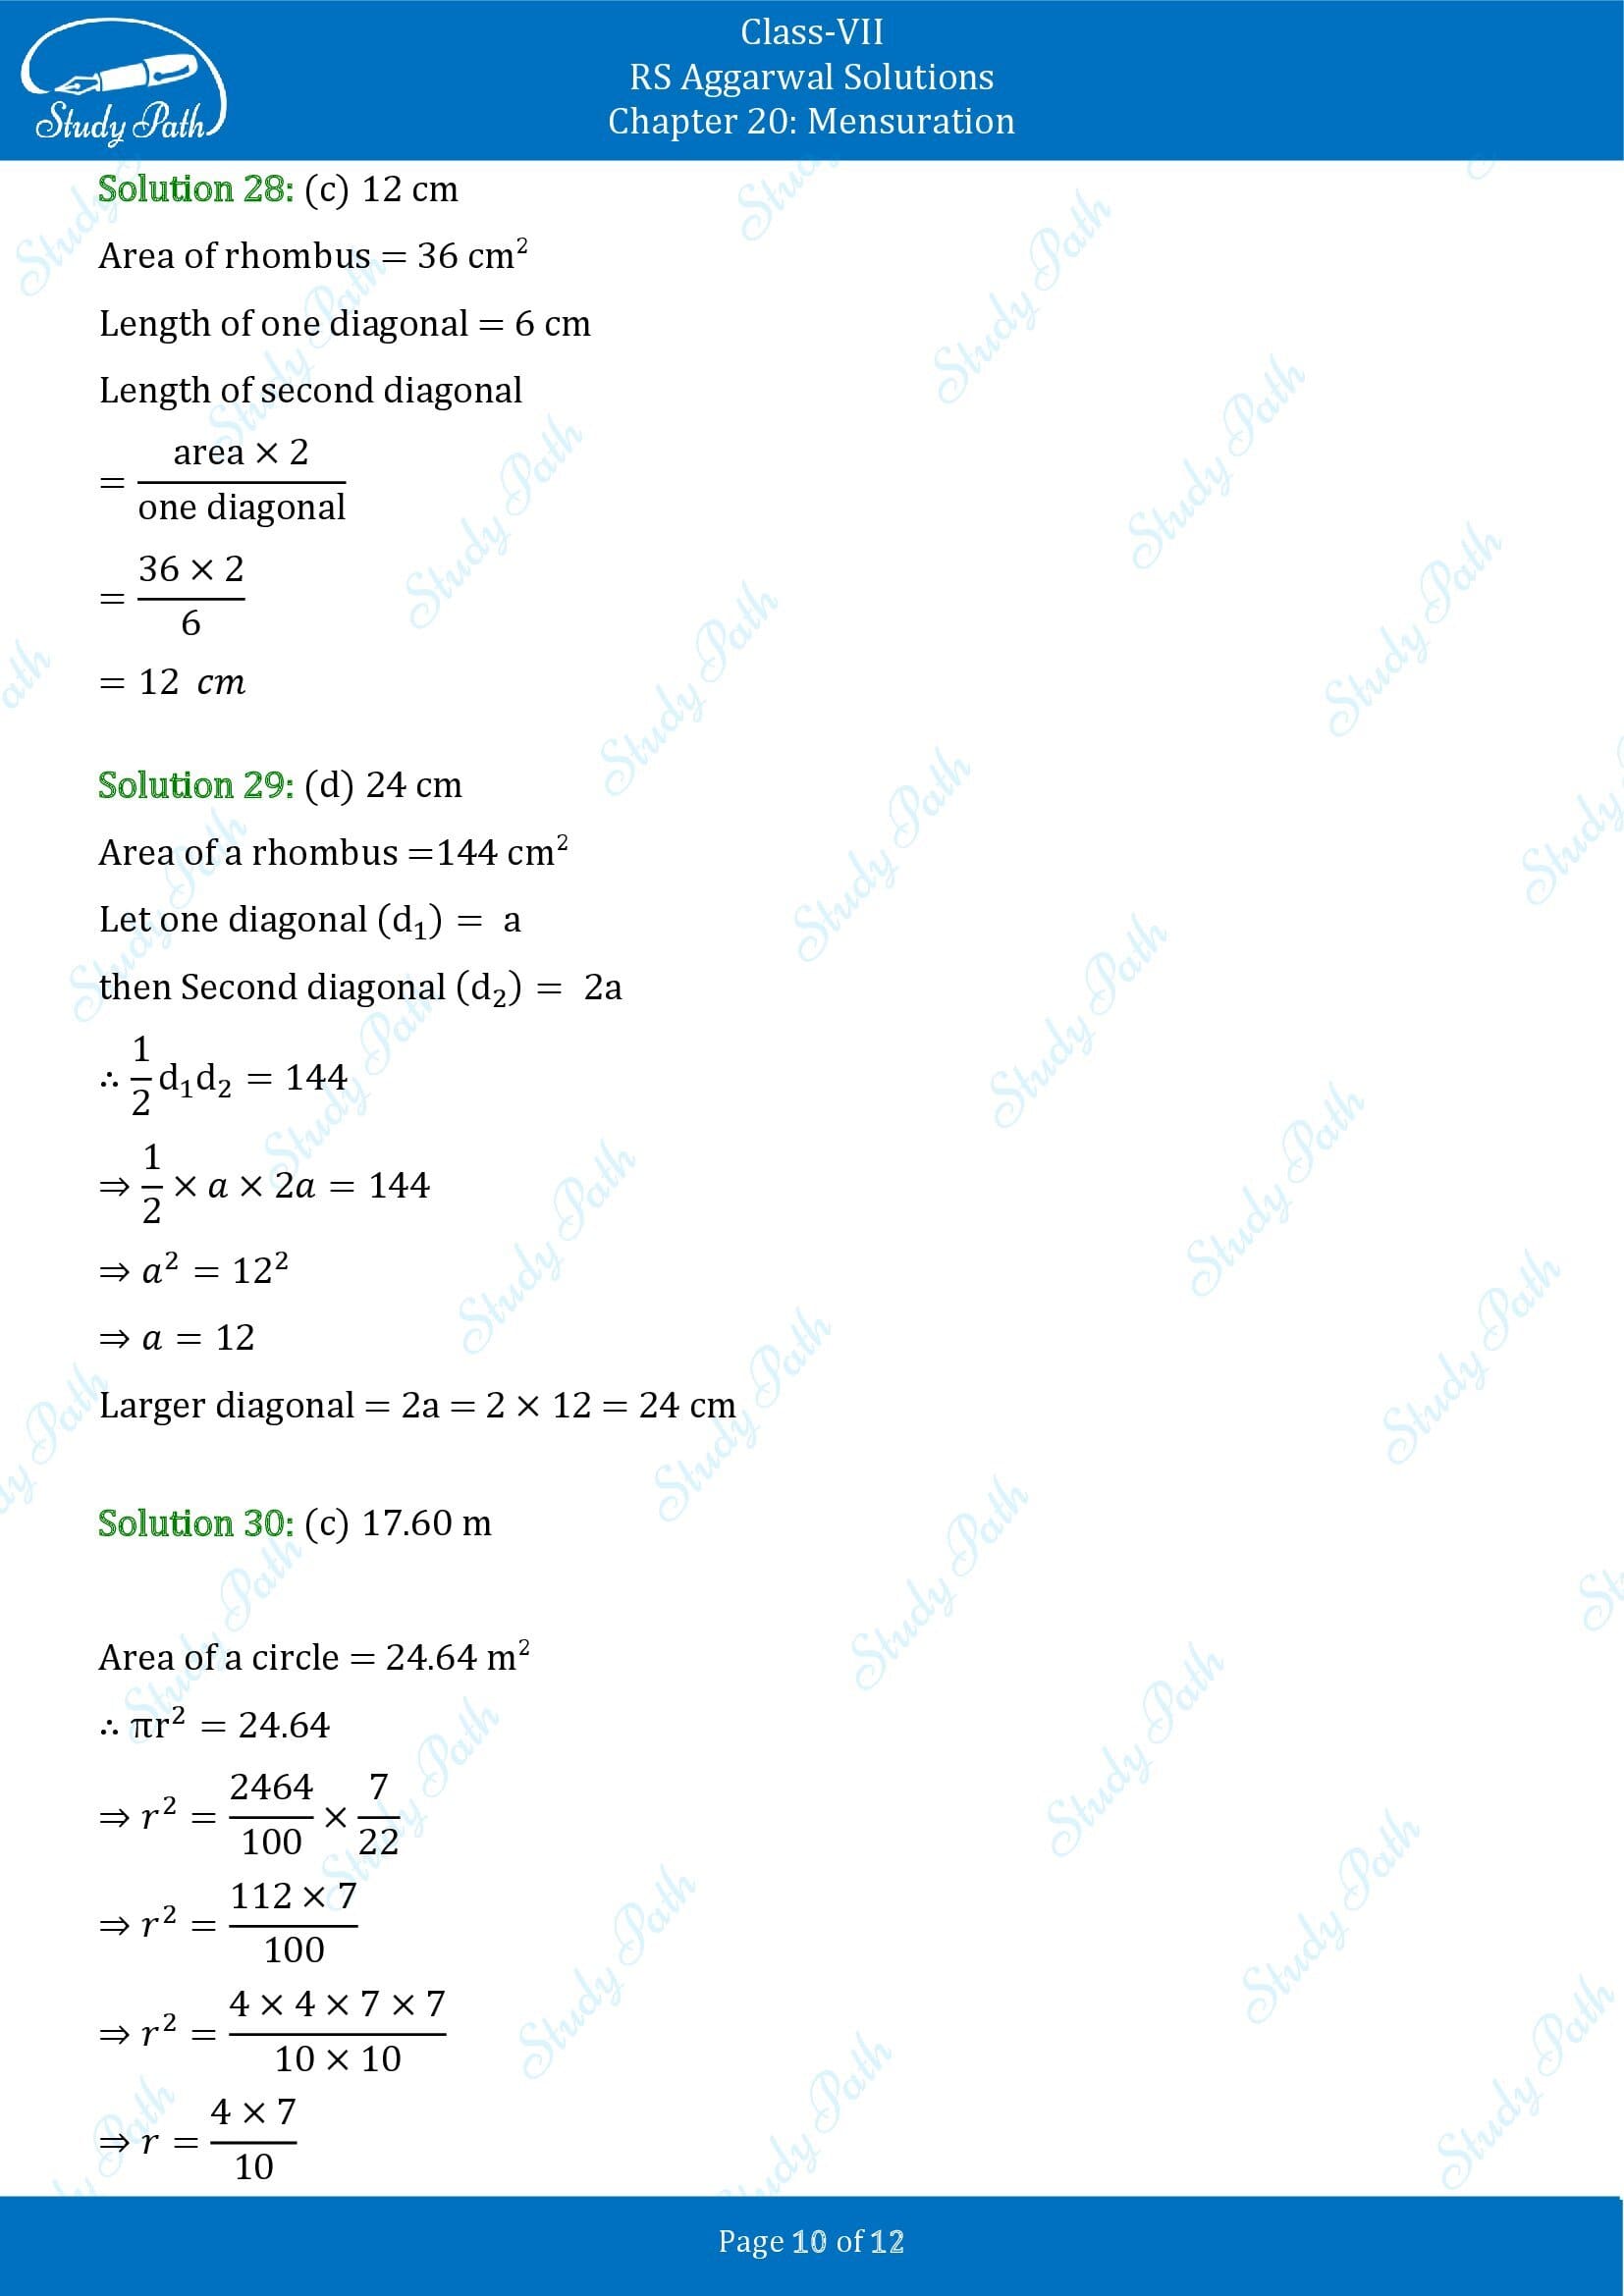 RS Aggarwal Solutions Class 7 Chapter 20 Mensuration Exercise 20G MCQ 00010